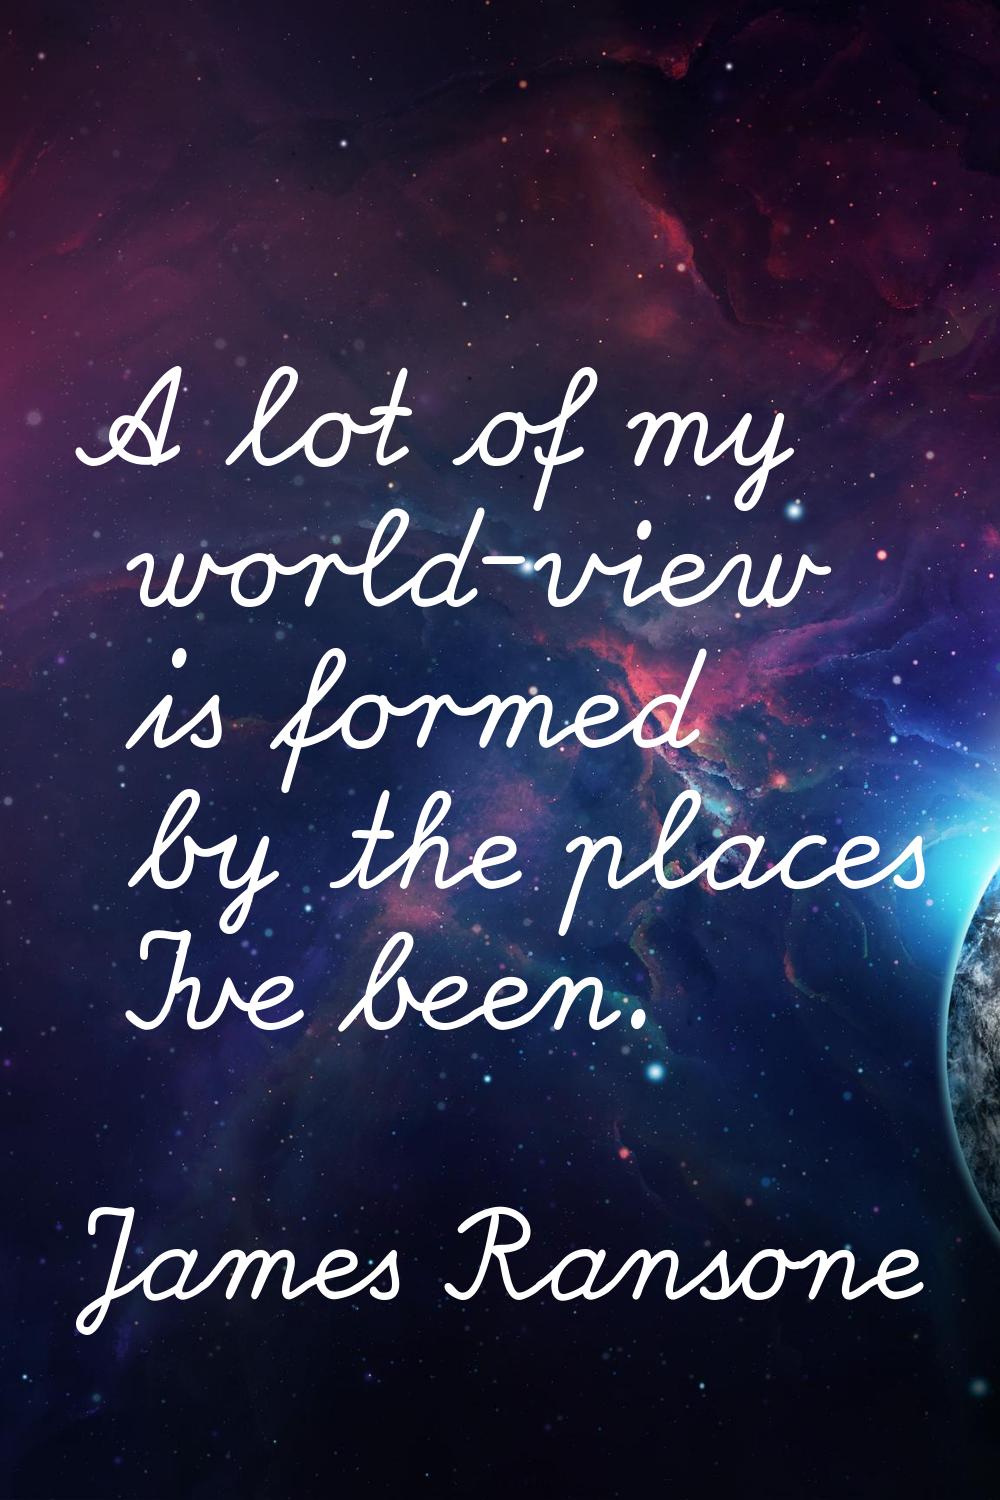 A lot of my world-view is formed by the places I've been.